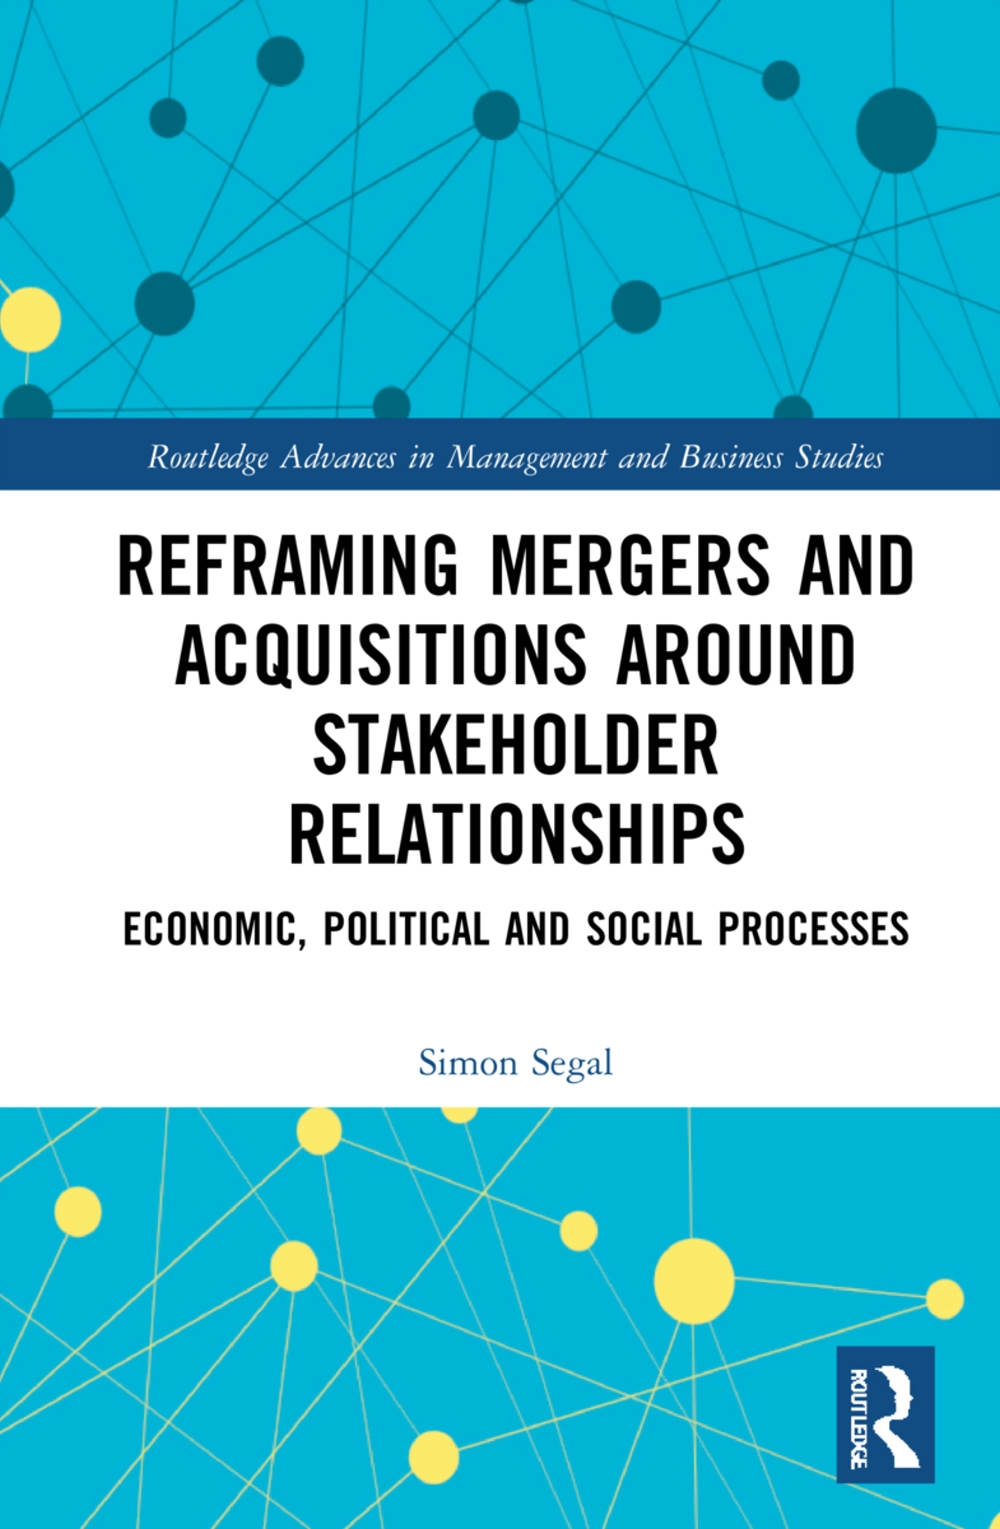 Reframing Mergers and Acquisitions Around Stakeholder Relationships: Economic, Political and Social Processes